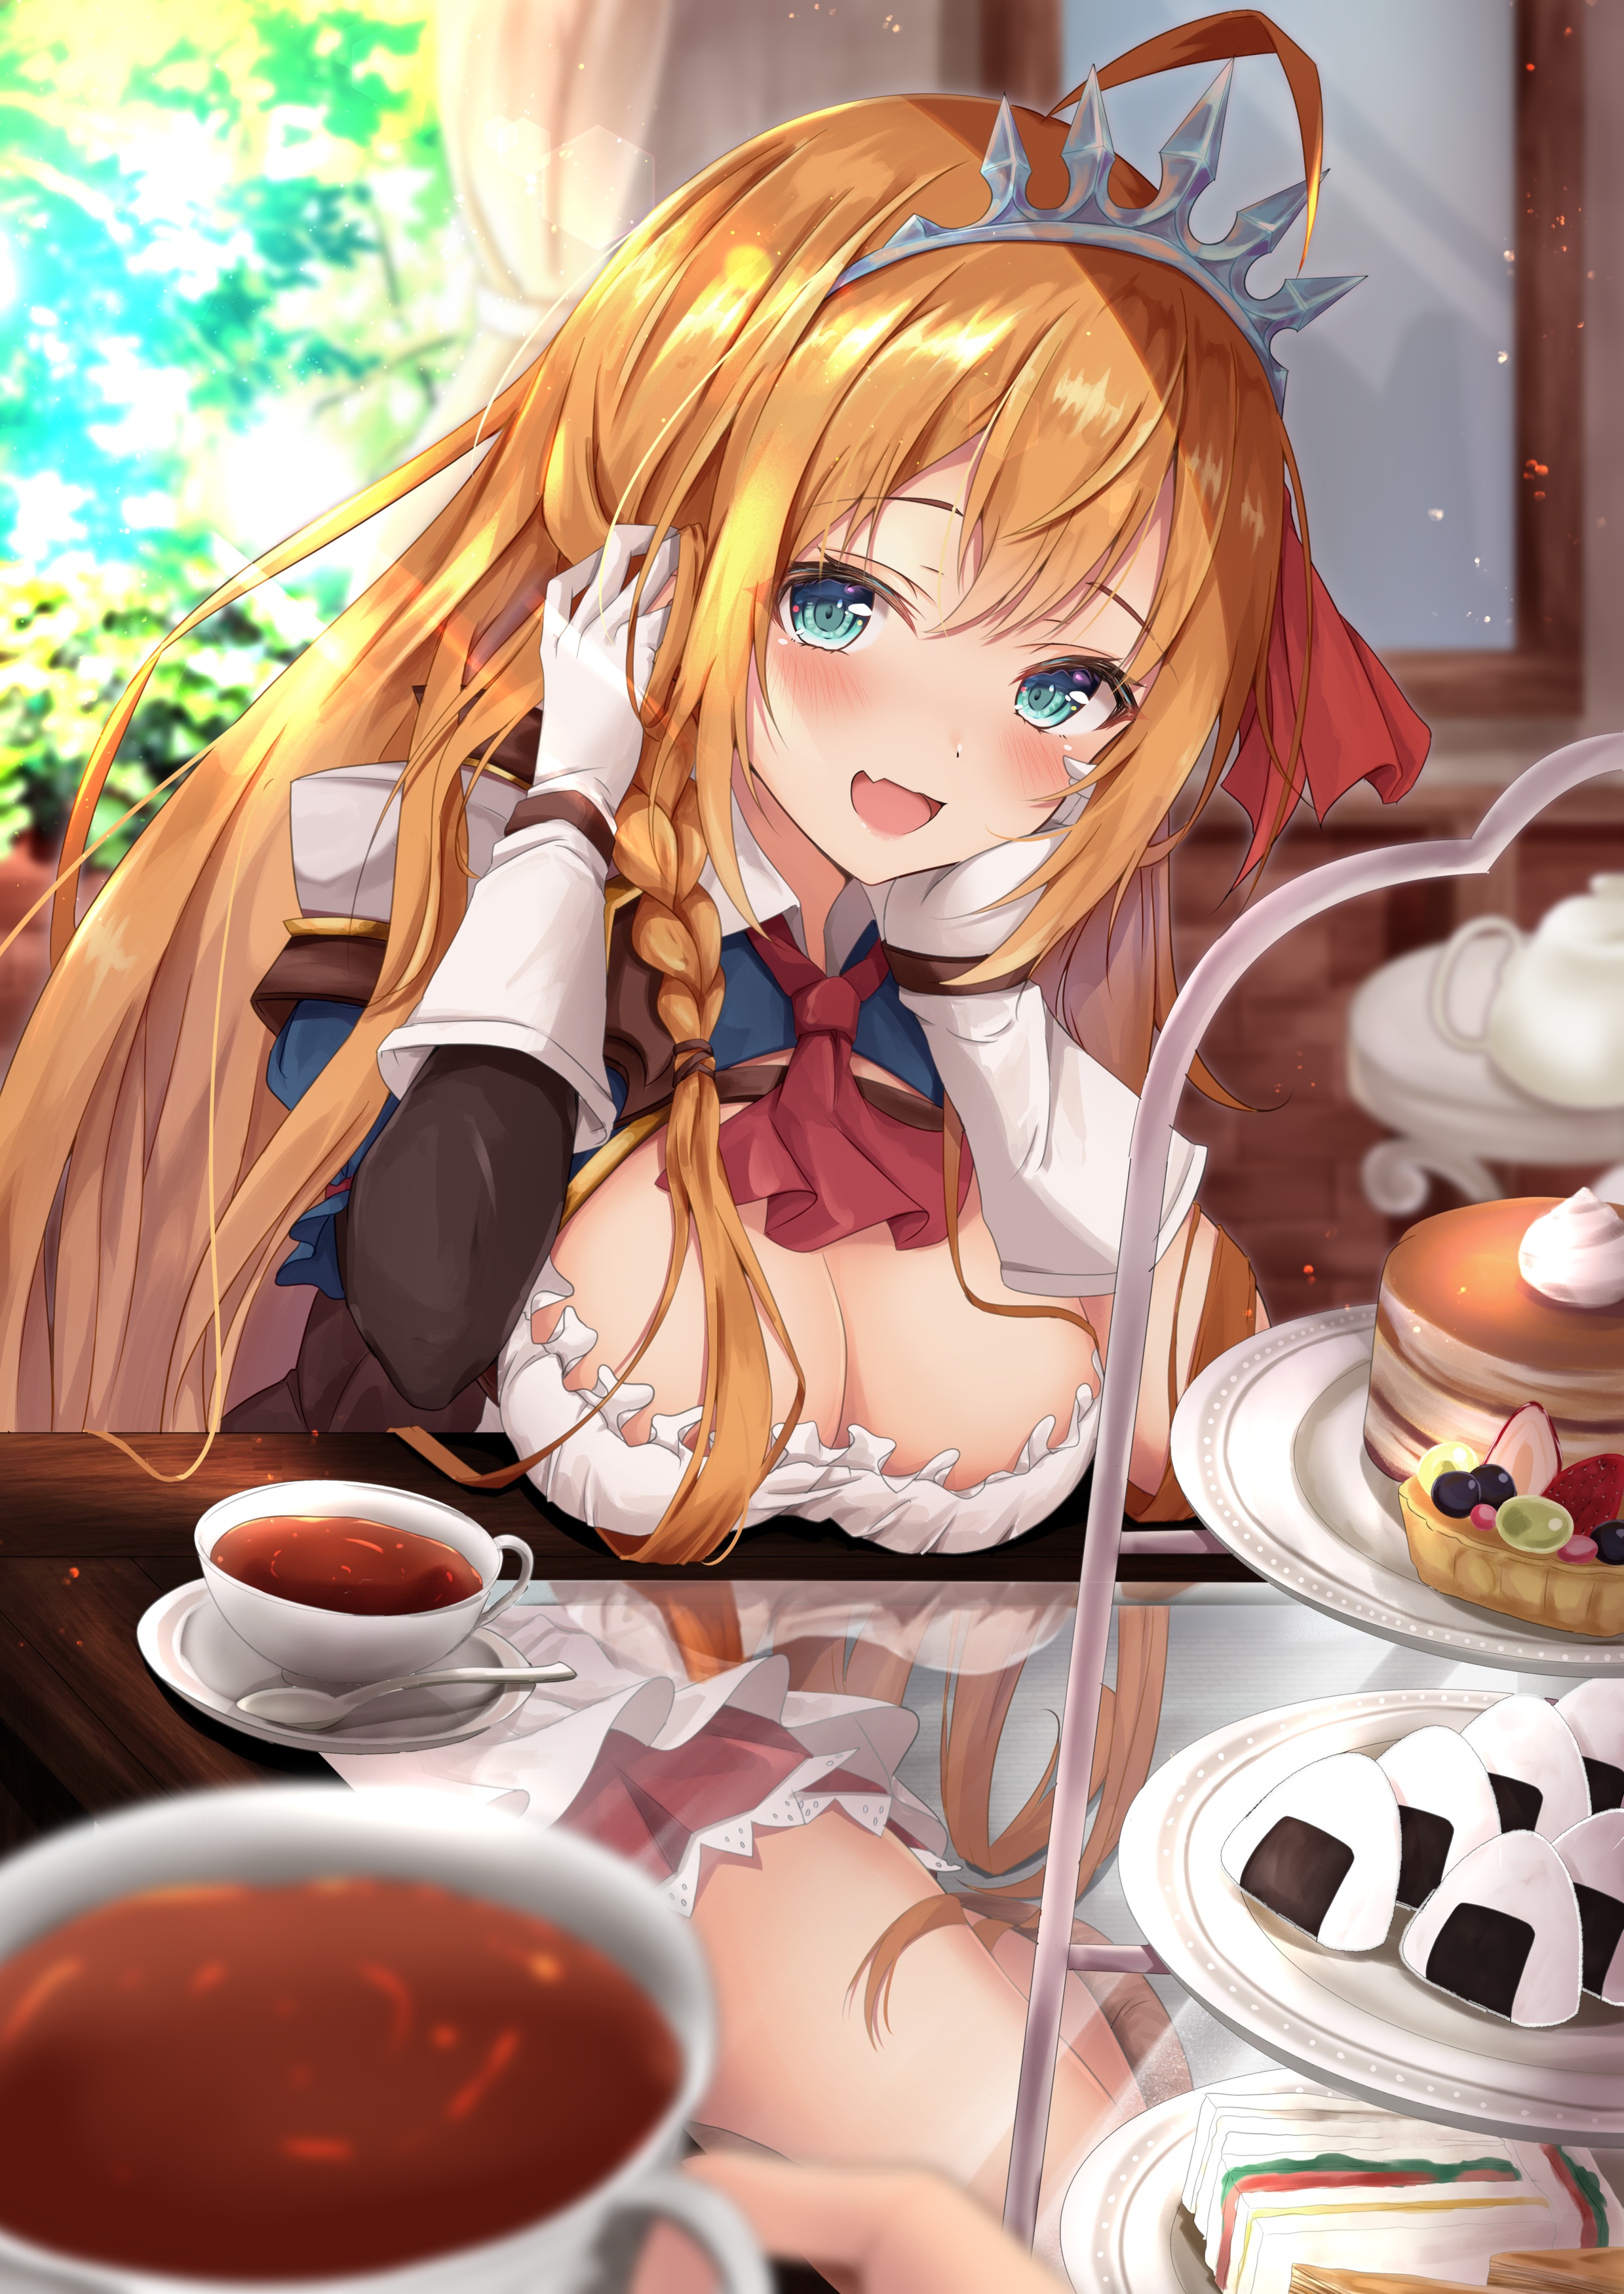 Anime 2478x3500 anime anime girls Princess Connect Re:Dive maid outfit blue eyes tea sweets rice balls food pancakes sandwiches reflection